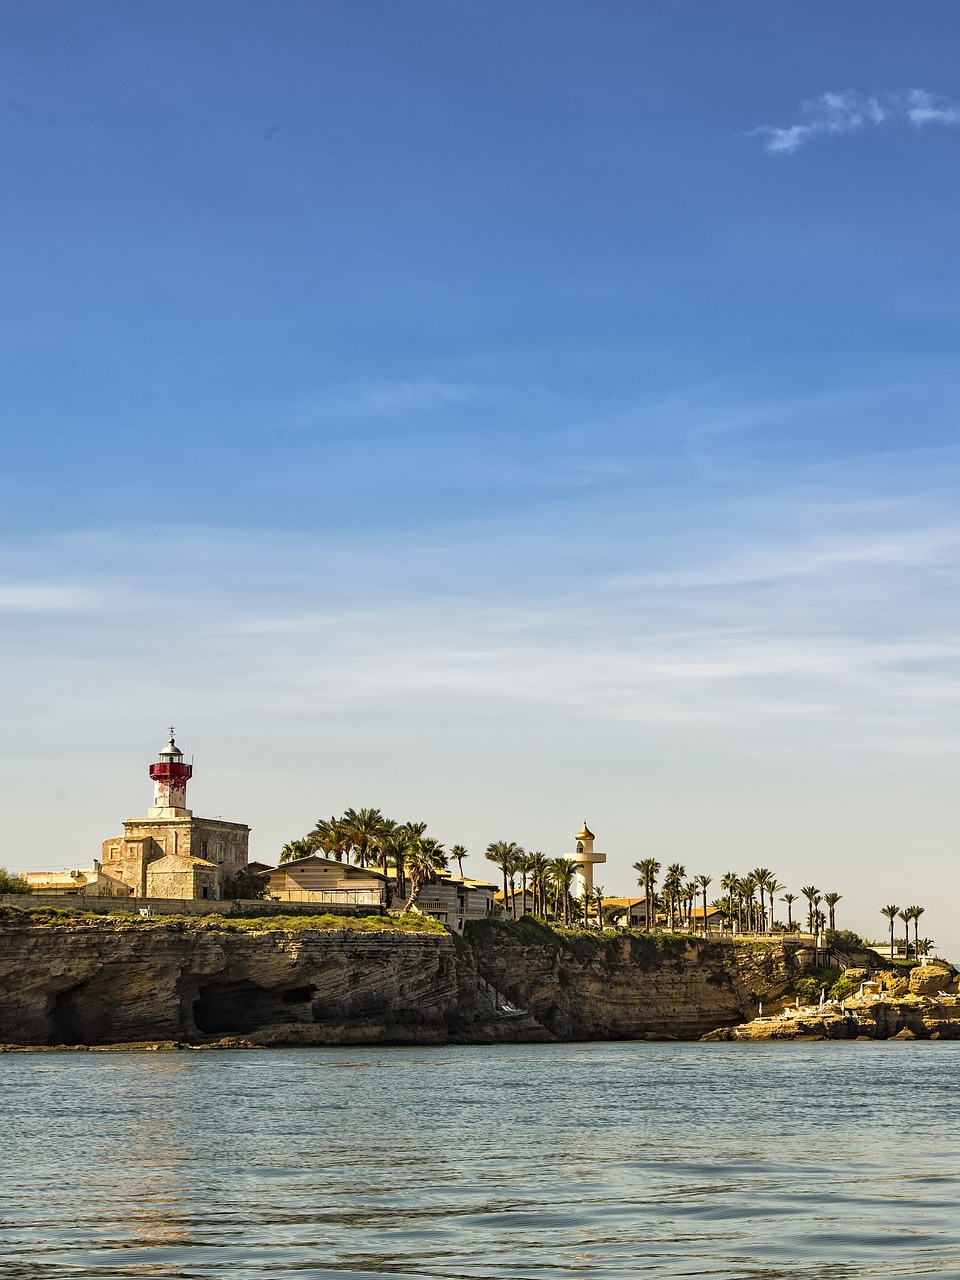 an image of a sicilian coast with a lighthouse and a calm sea underneath. on the coast there are various palm trees.